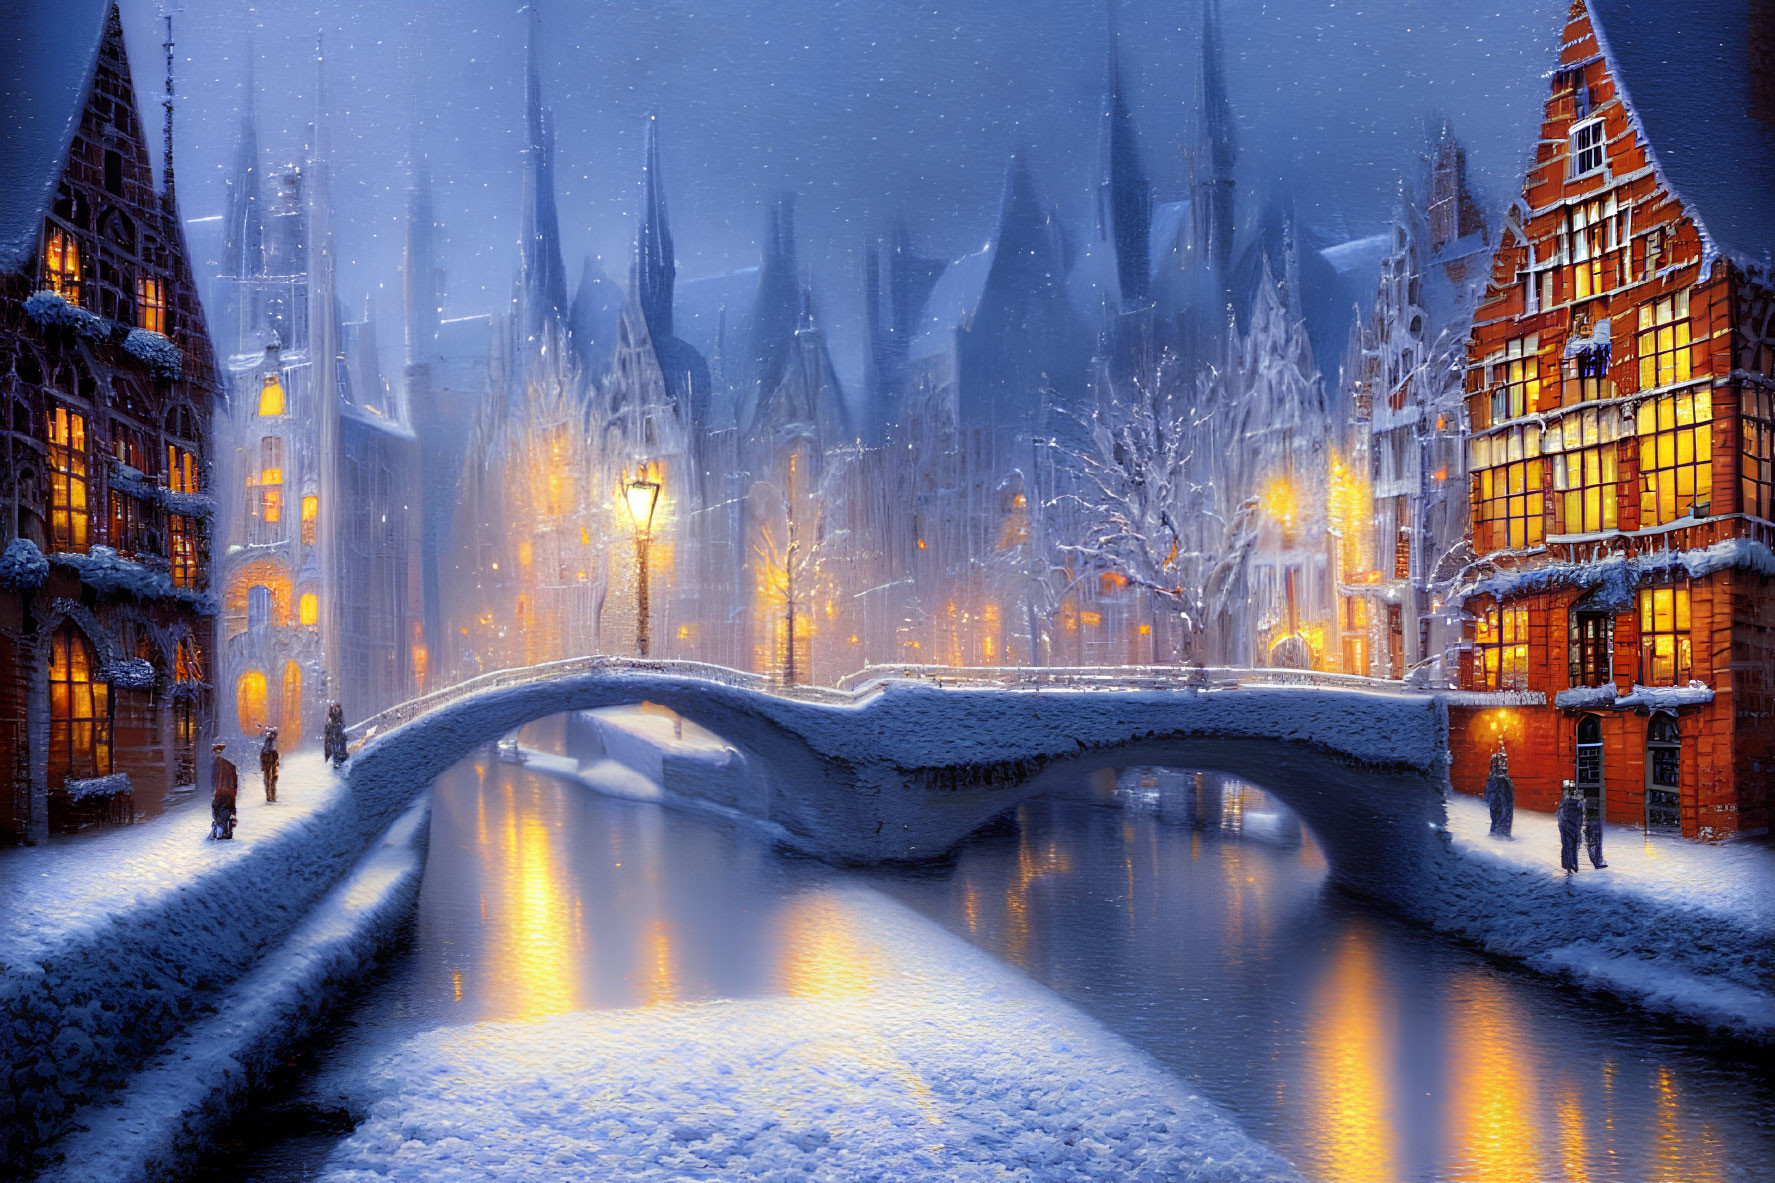 Snow-covered old town with illuminated buildings, canal bridge, and pedestrians